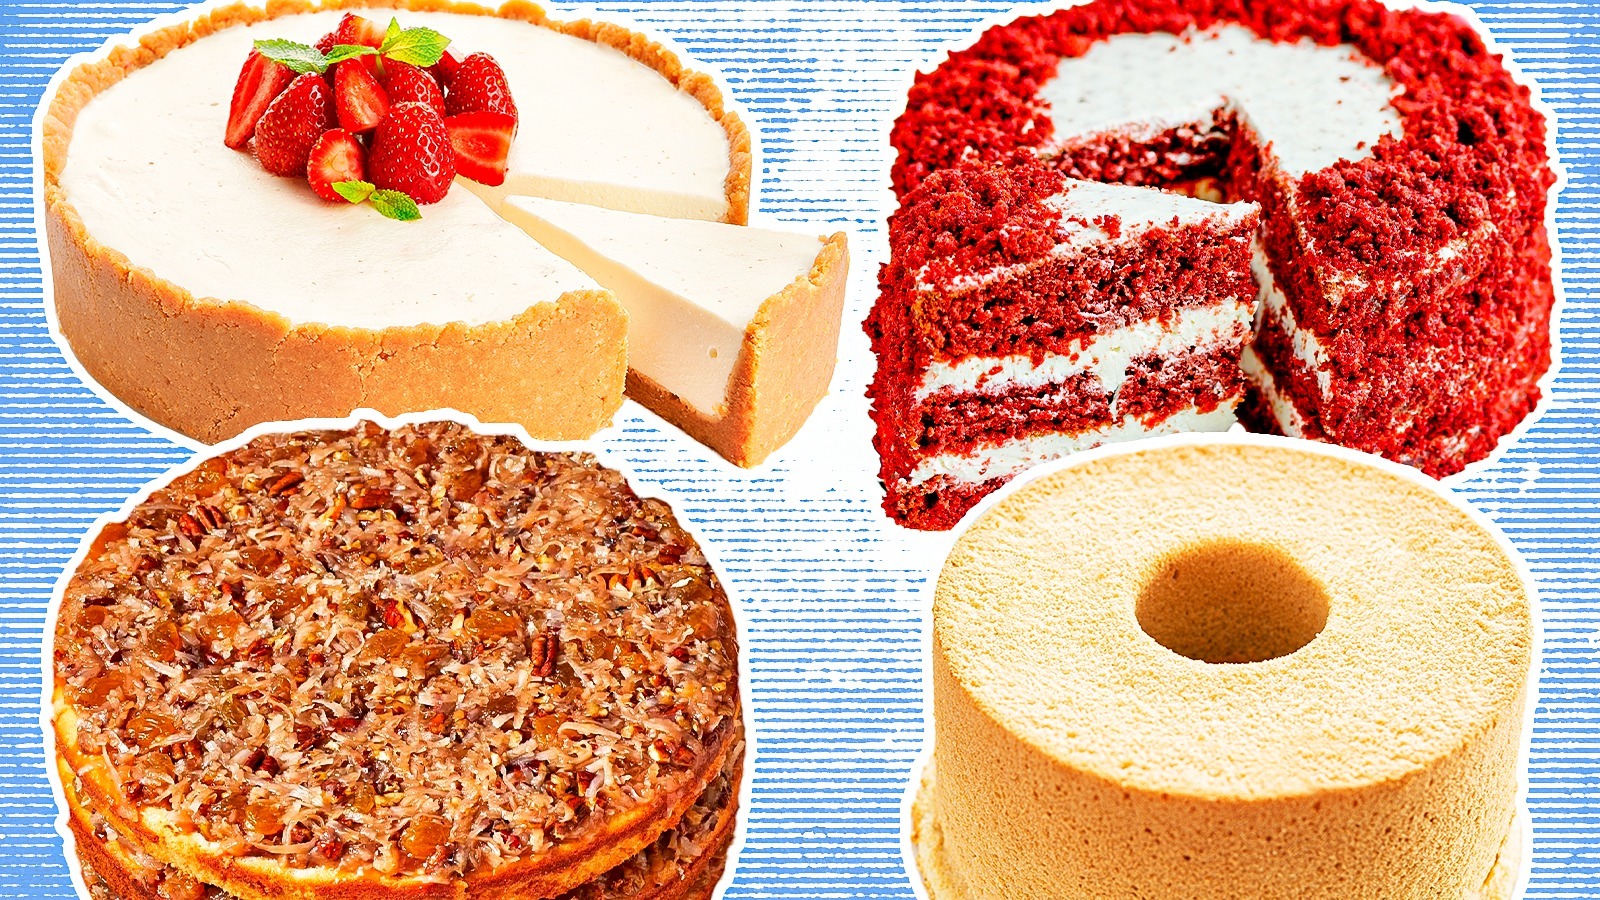 https://www.thedailymeal.com/img/gallery/the-most-iconic-cakes-in-16-states/l-intro-1687200135.jpg